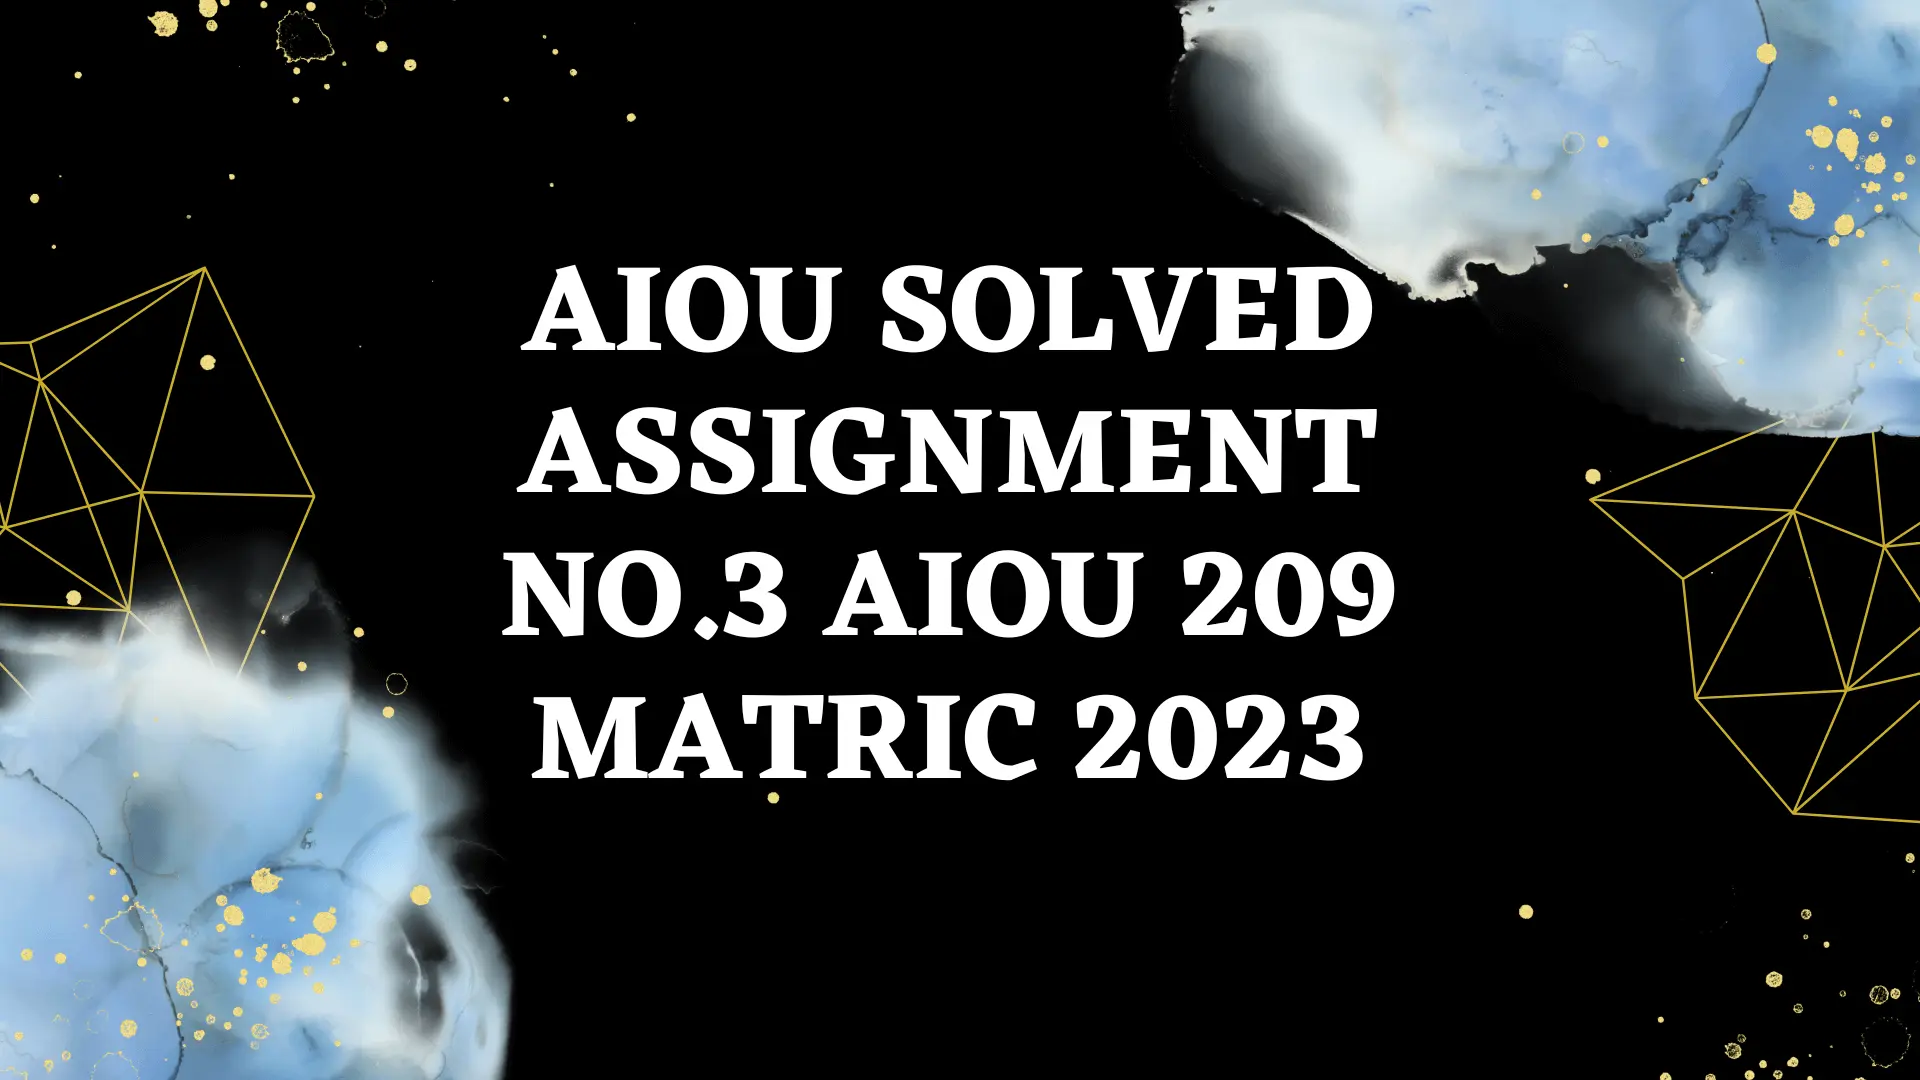 AIOU Solved Assignment